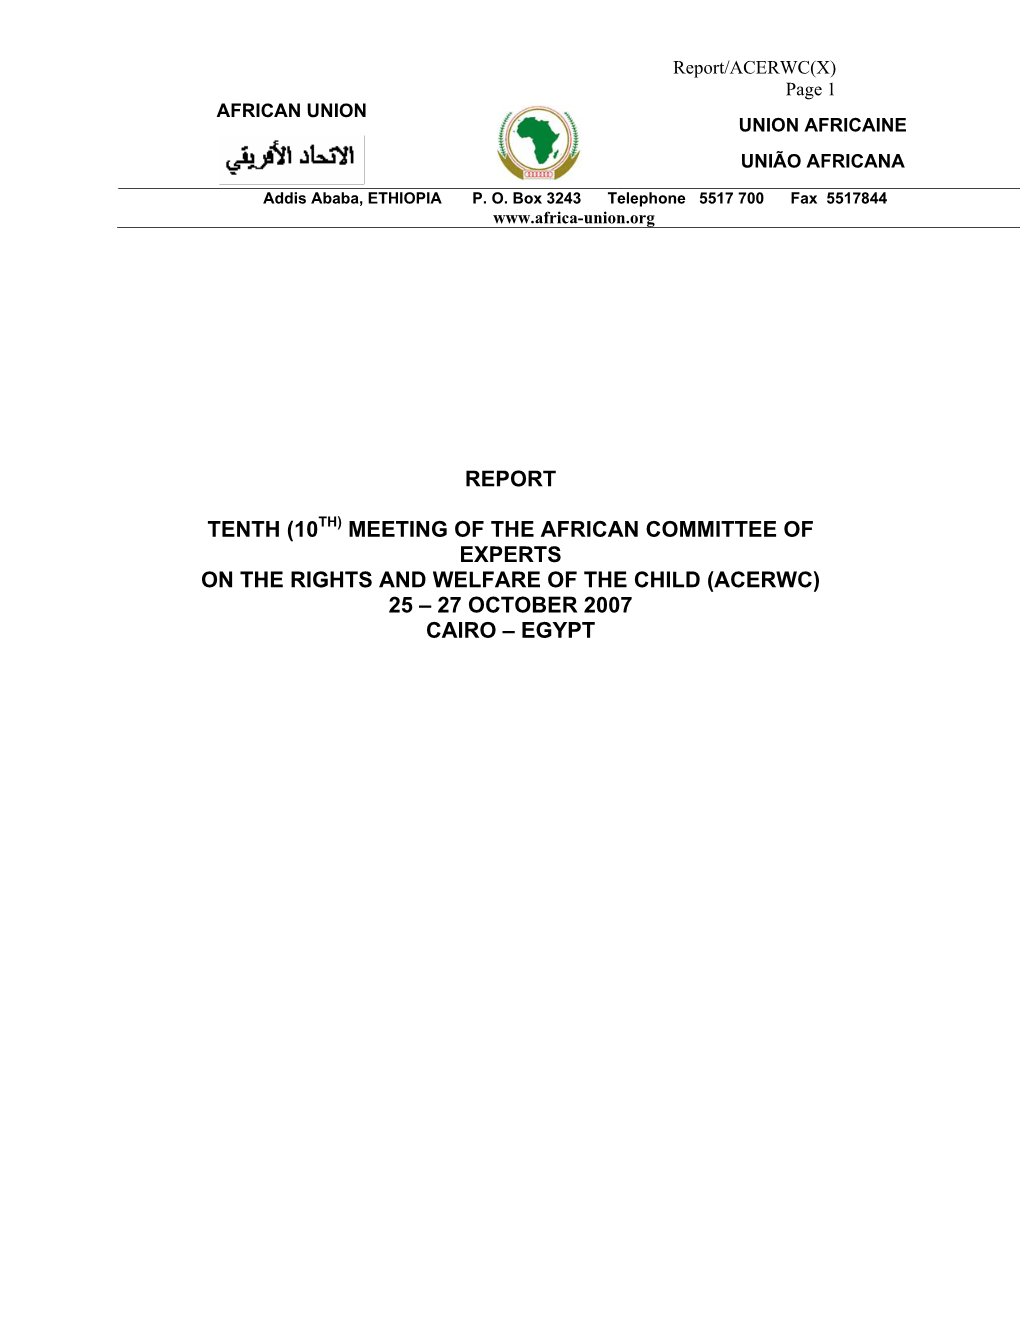 Report Tenth (10 Meeting of the African Committee Of